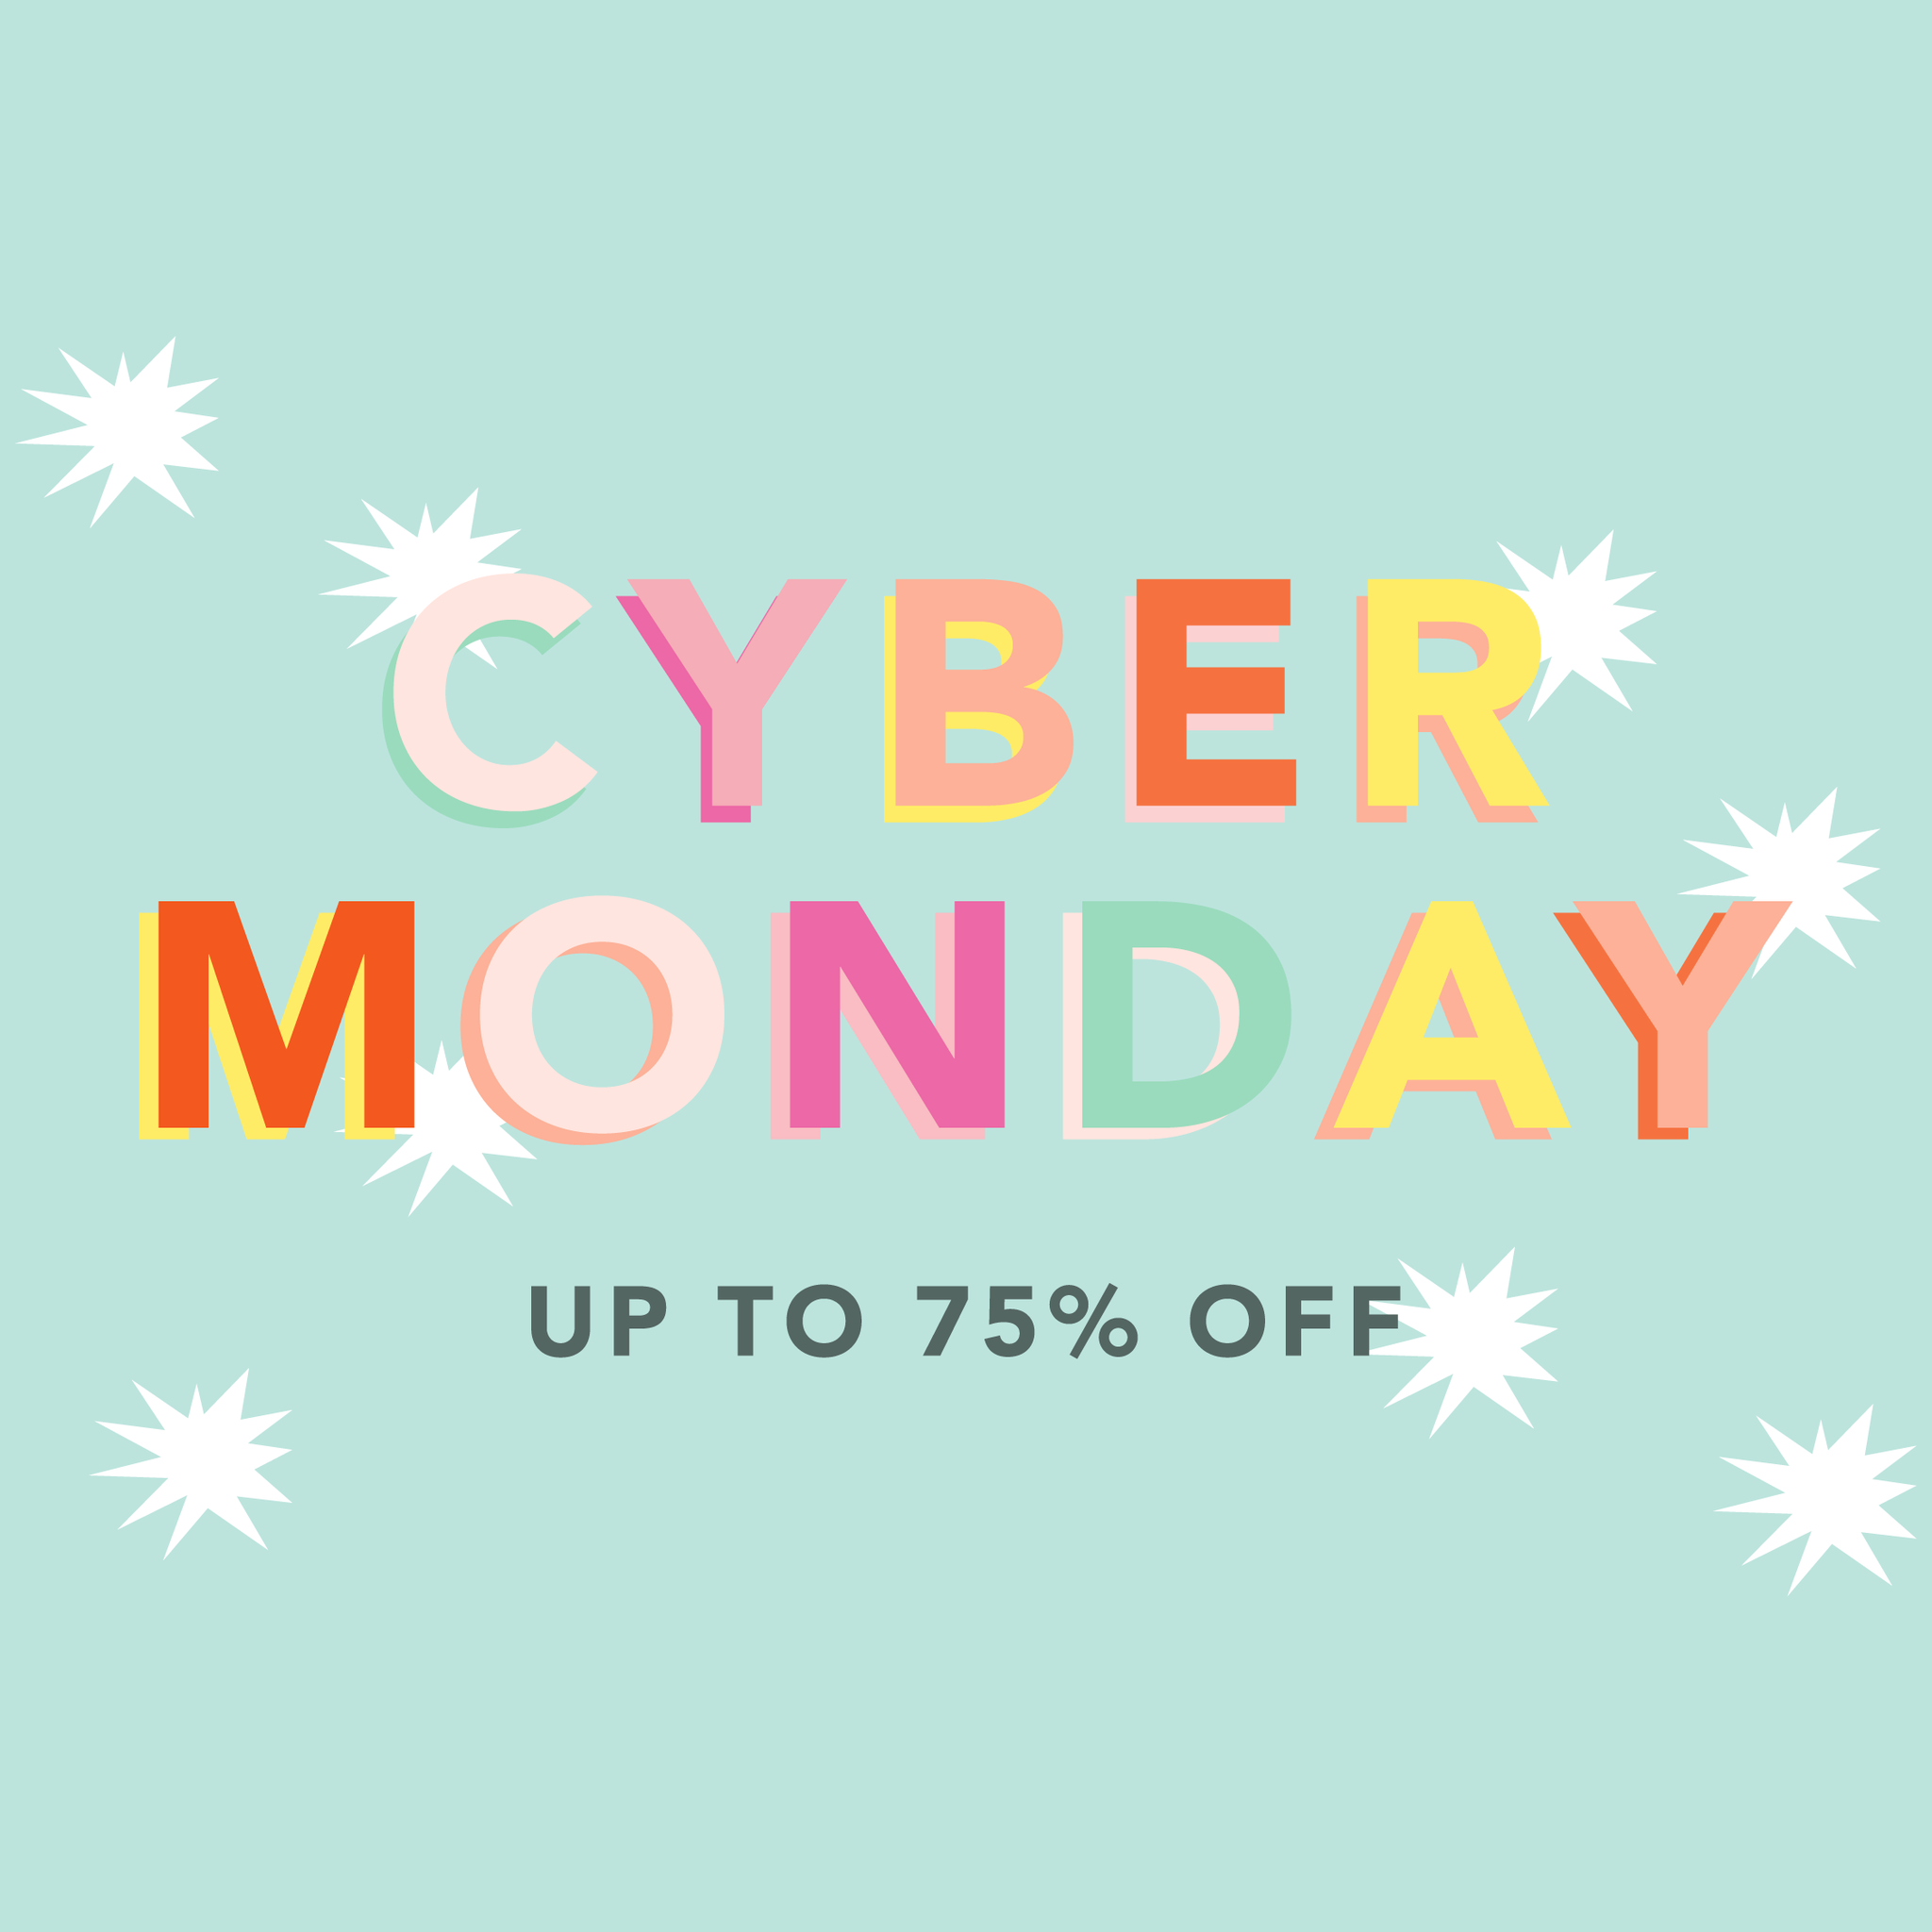 75% OFF FOR CYBER MONDAY